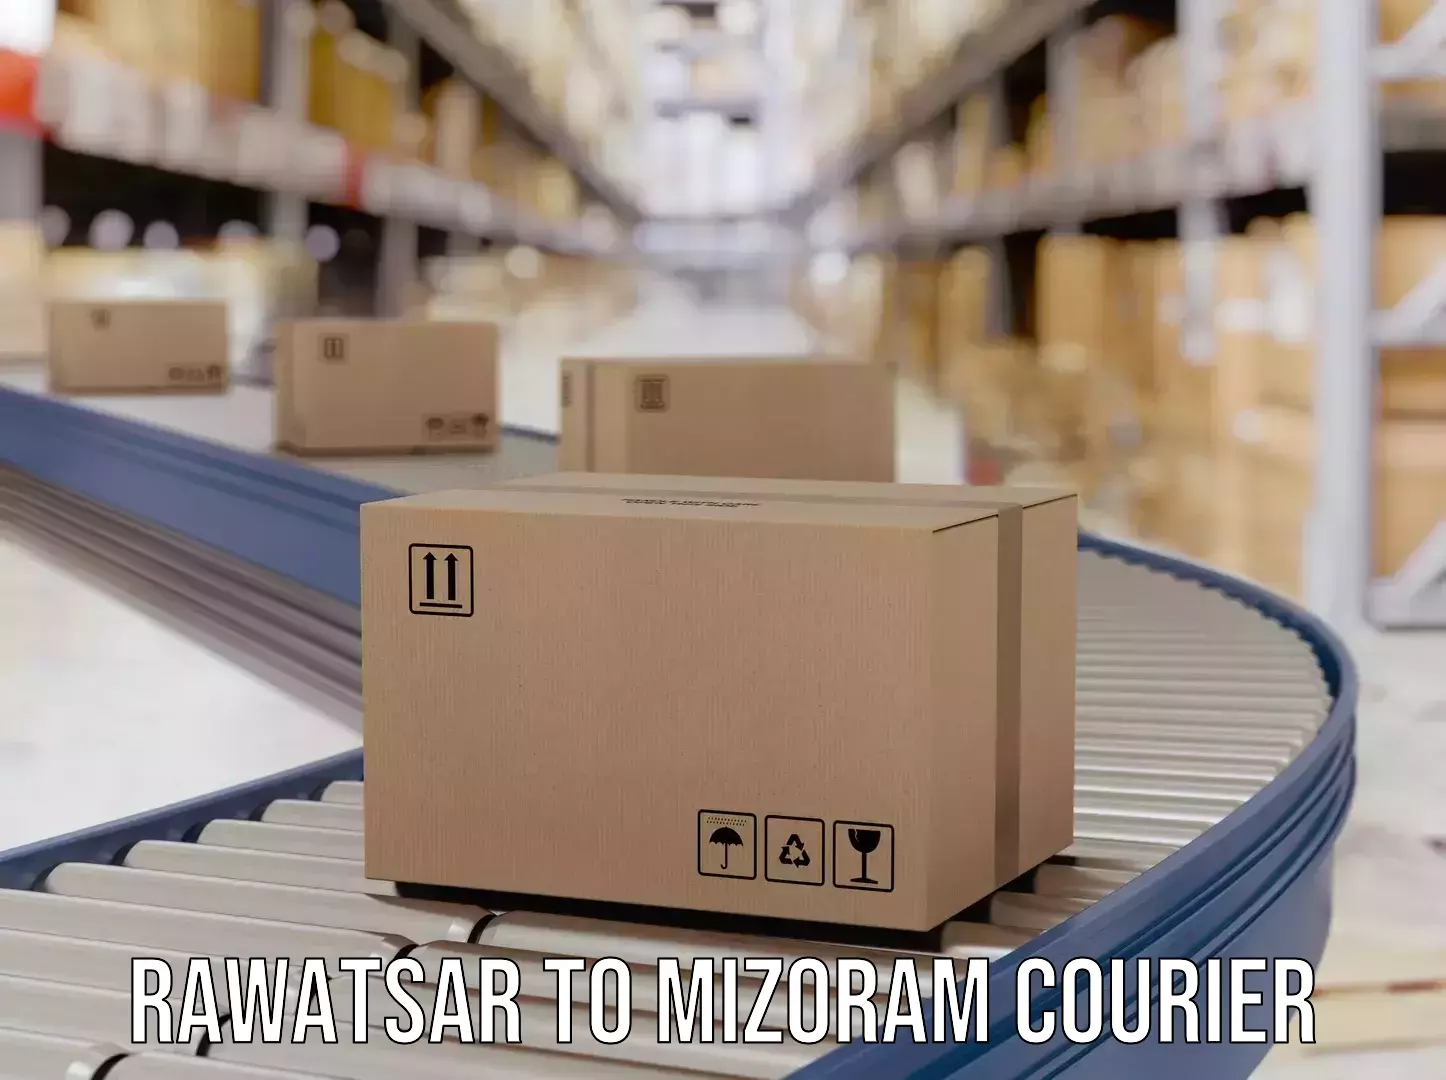 State-of-the-art courier technology Rawatsar to Mizoram